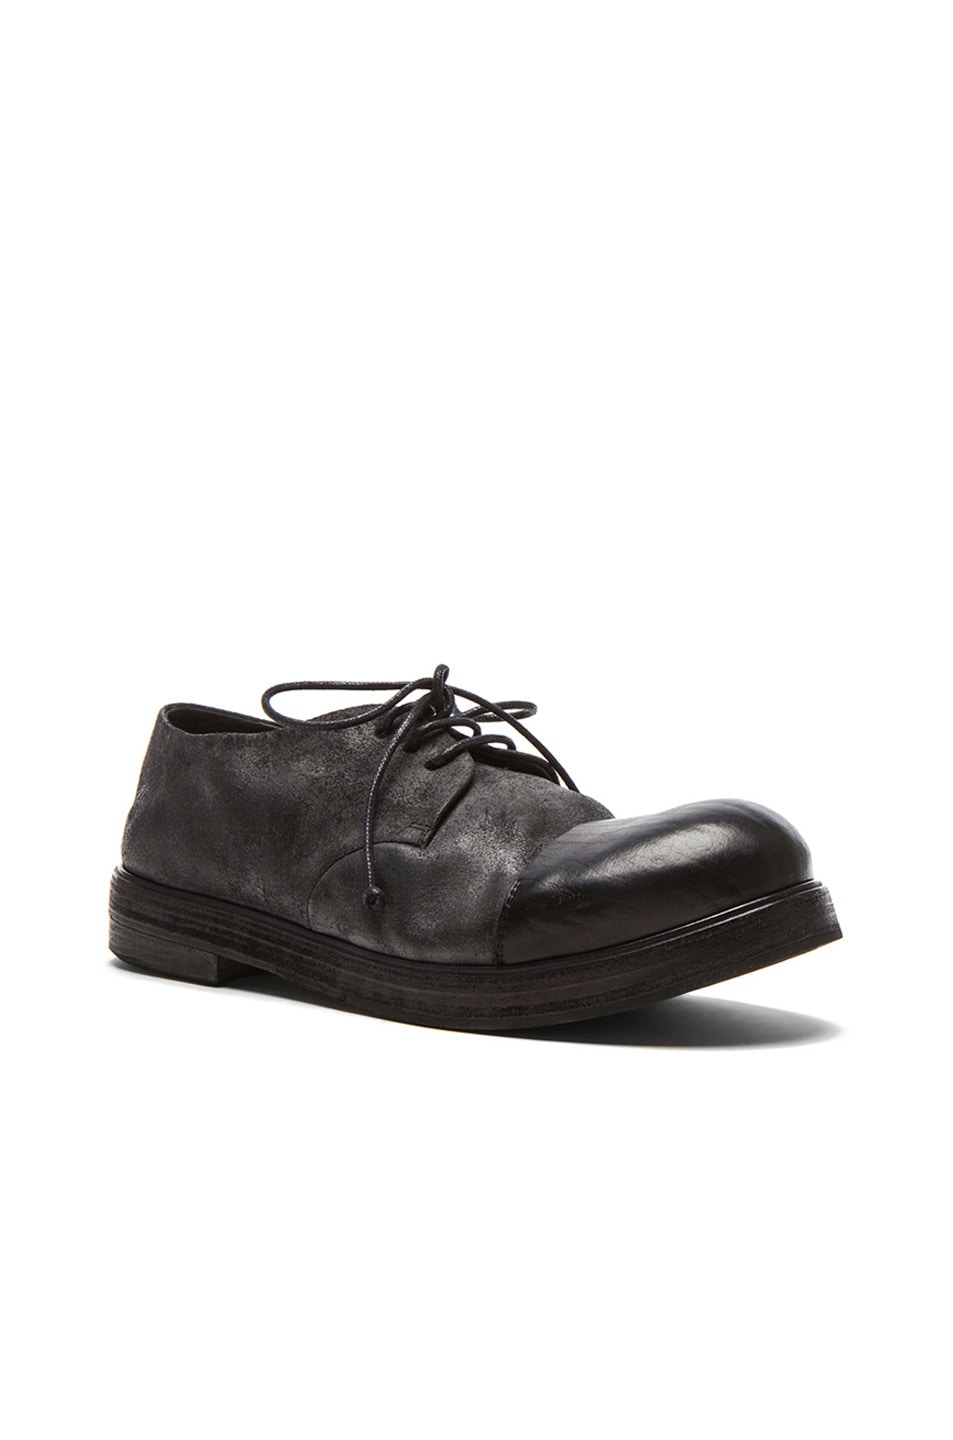 Image 1 of Marsell Cap Toe Leather Dress Shoes in Black